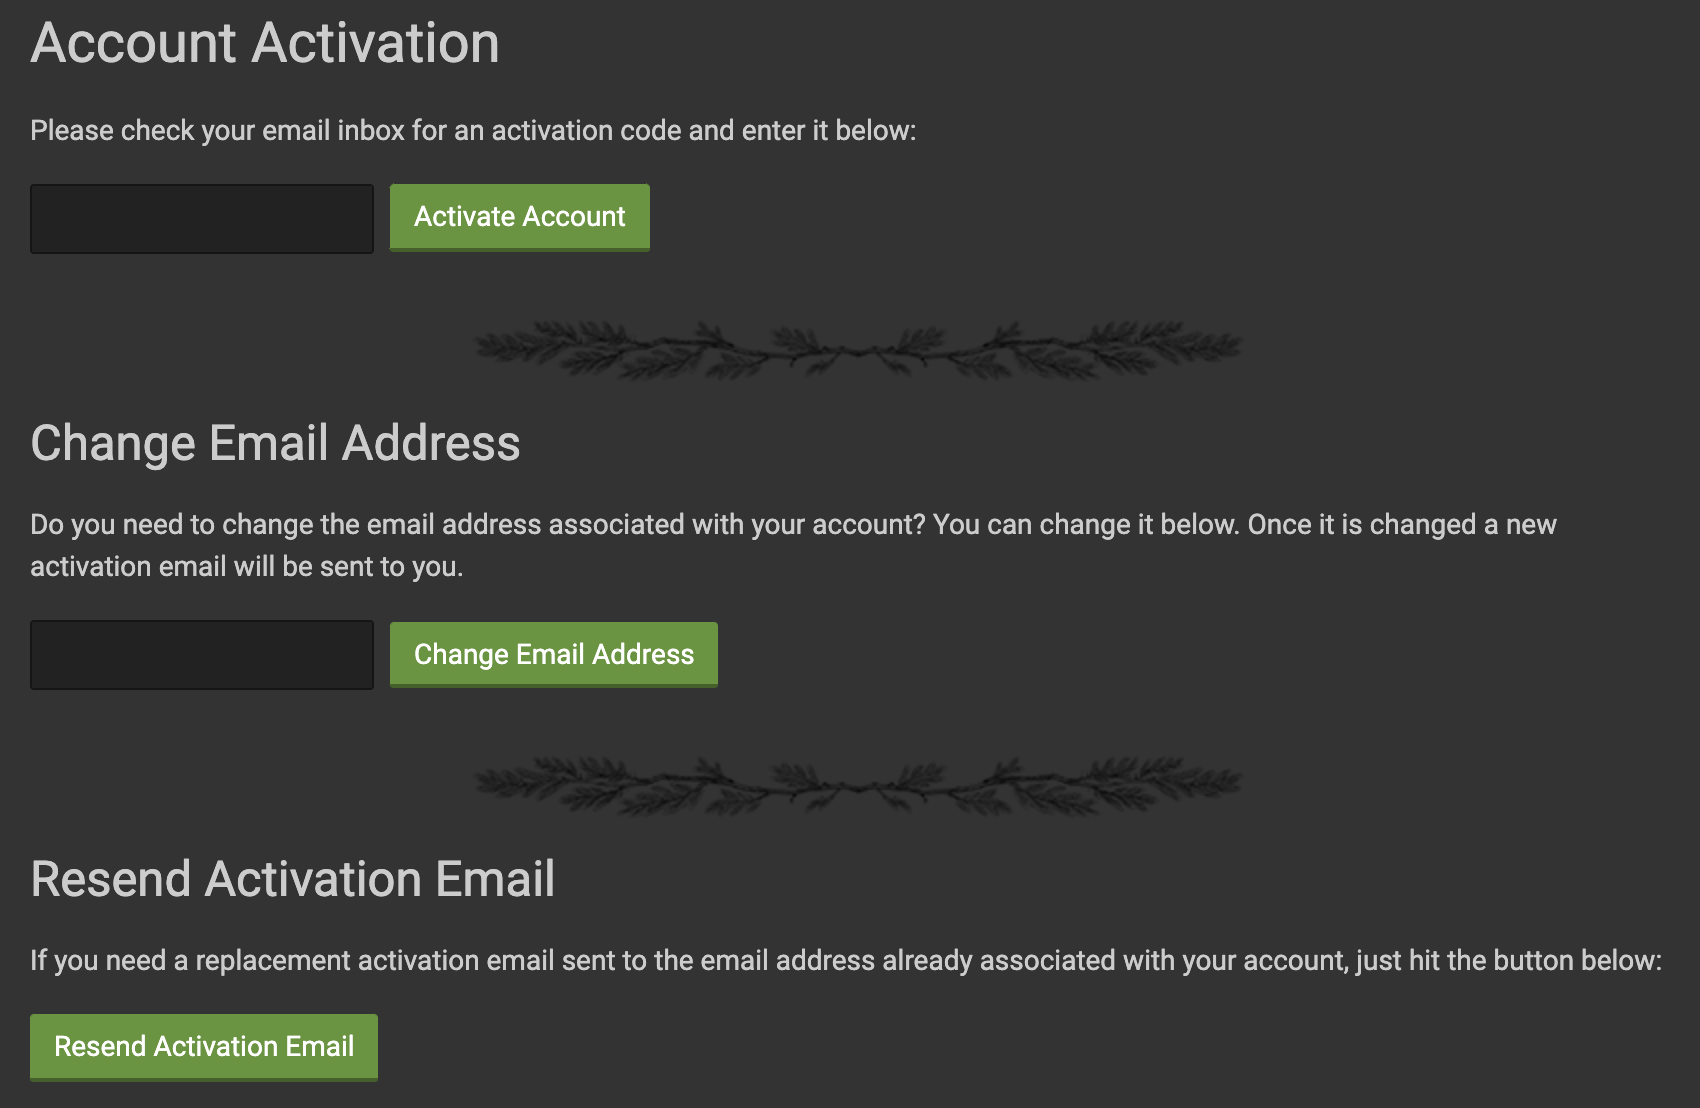 Account Activation, Change Email Address, Resend Activation Email